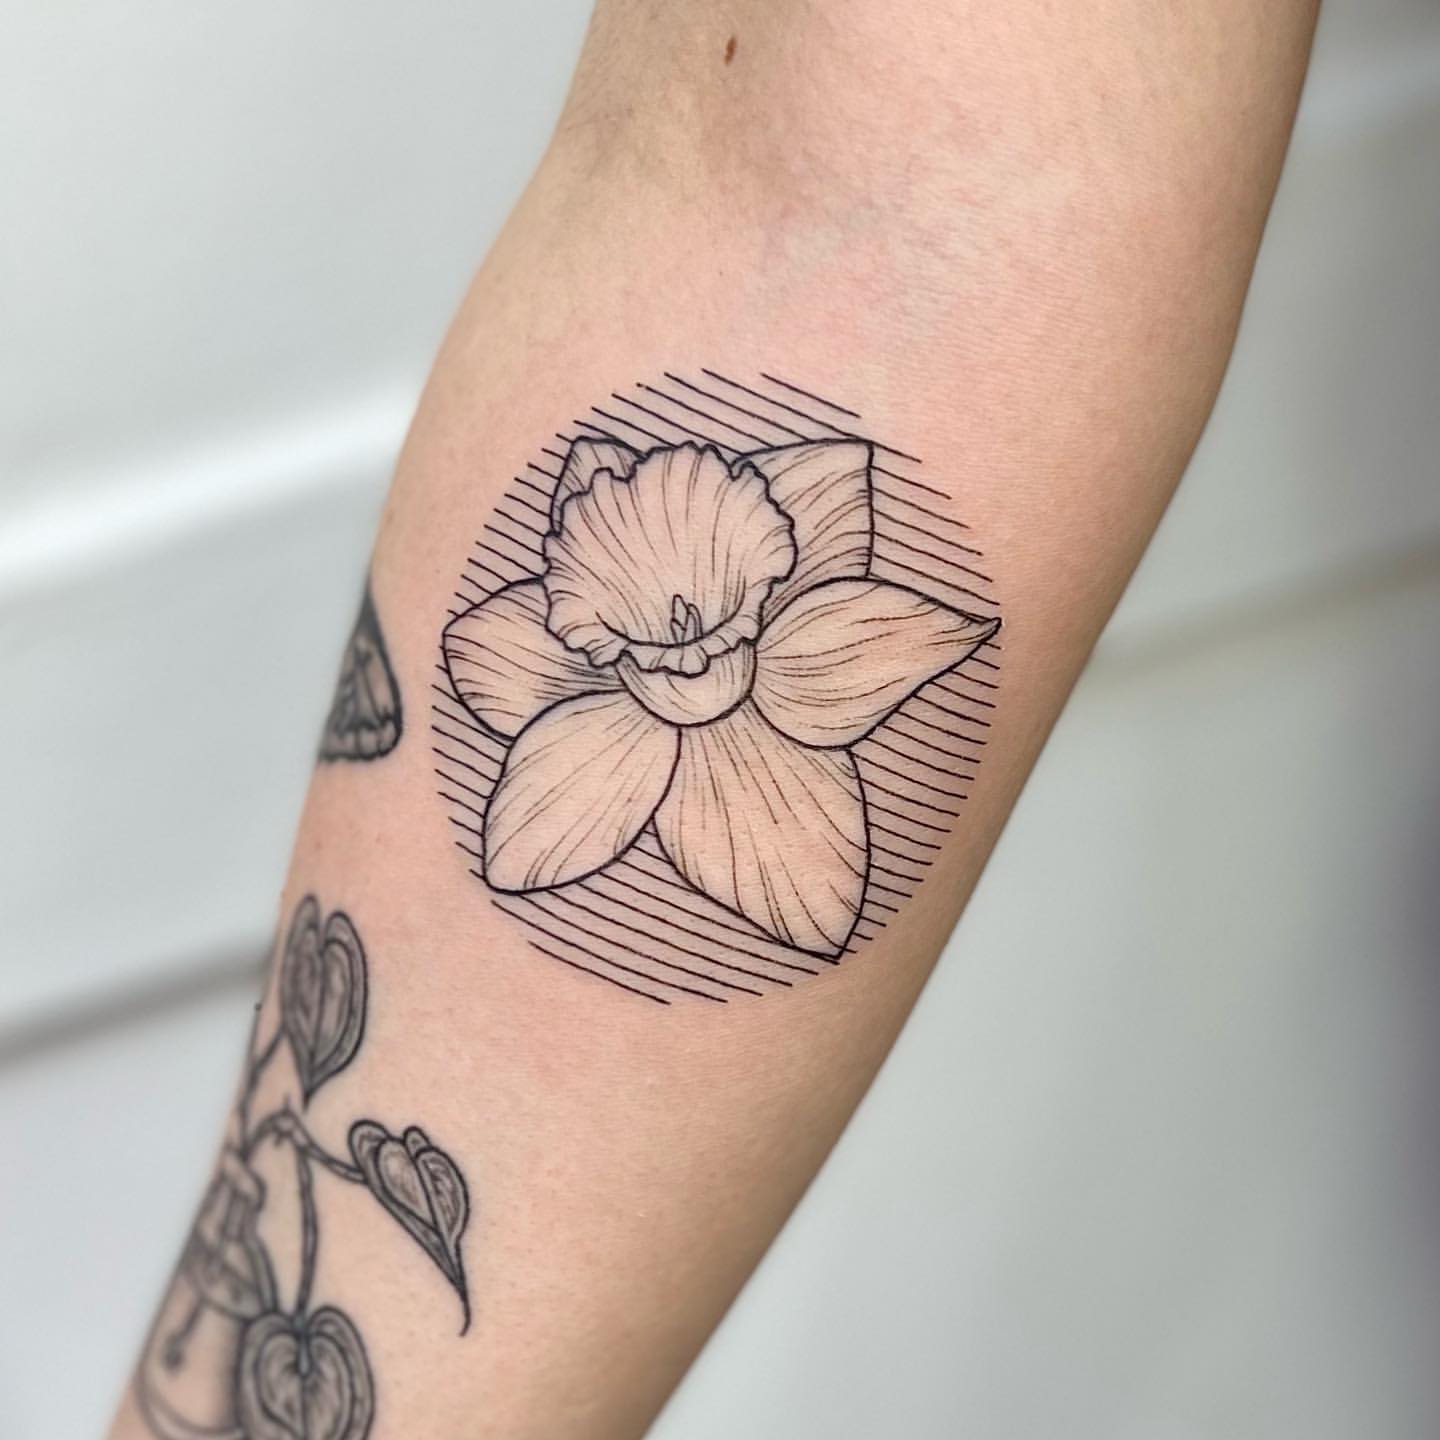 Fine line narcissus flower tattoo on the upper arm